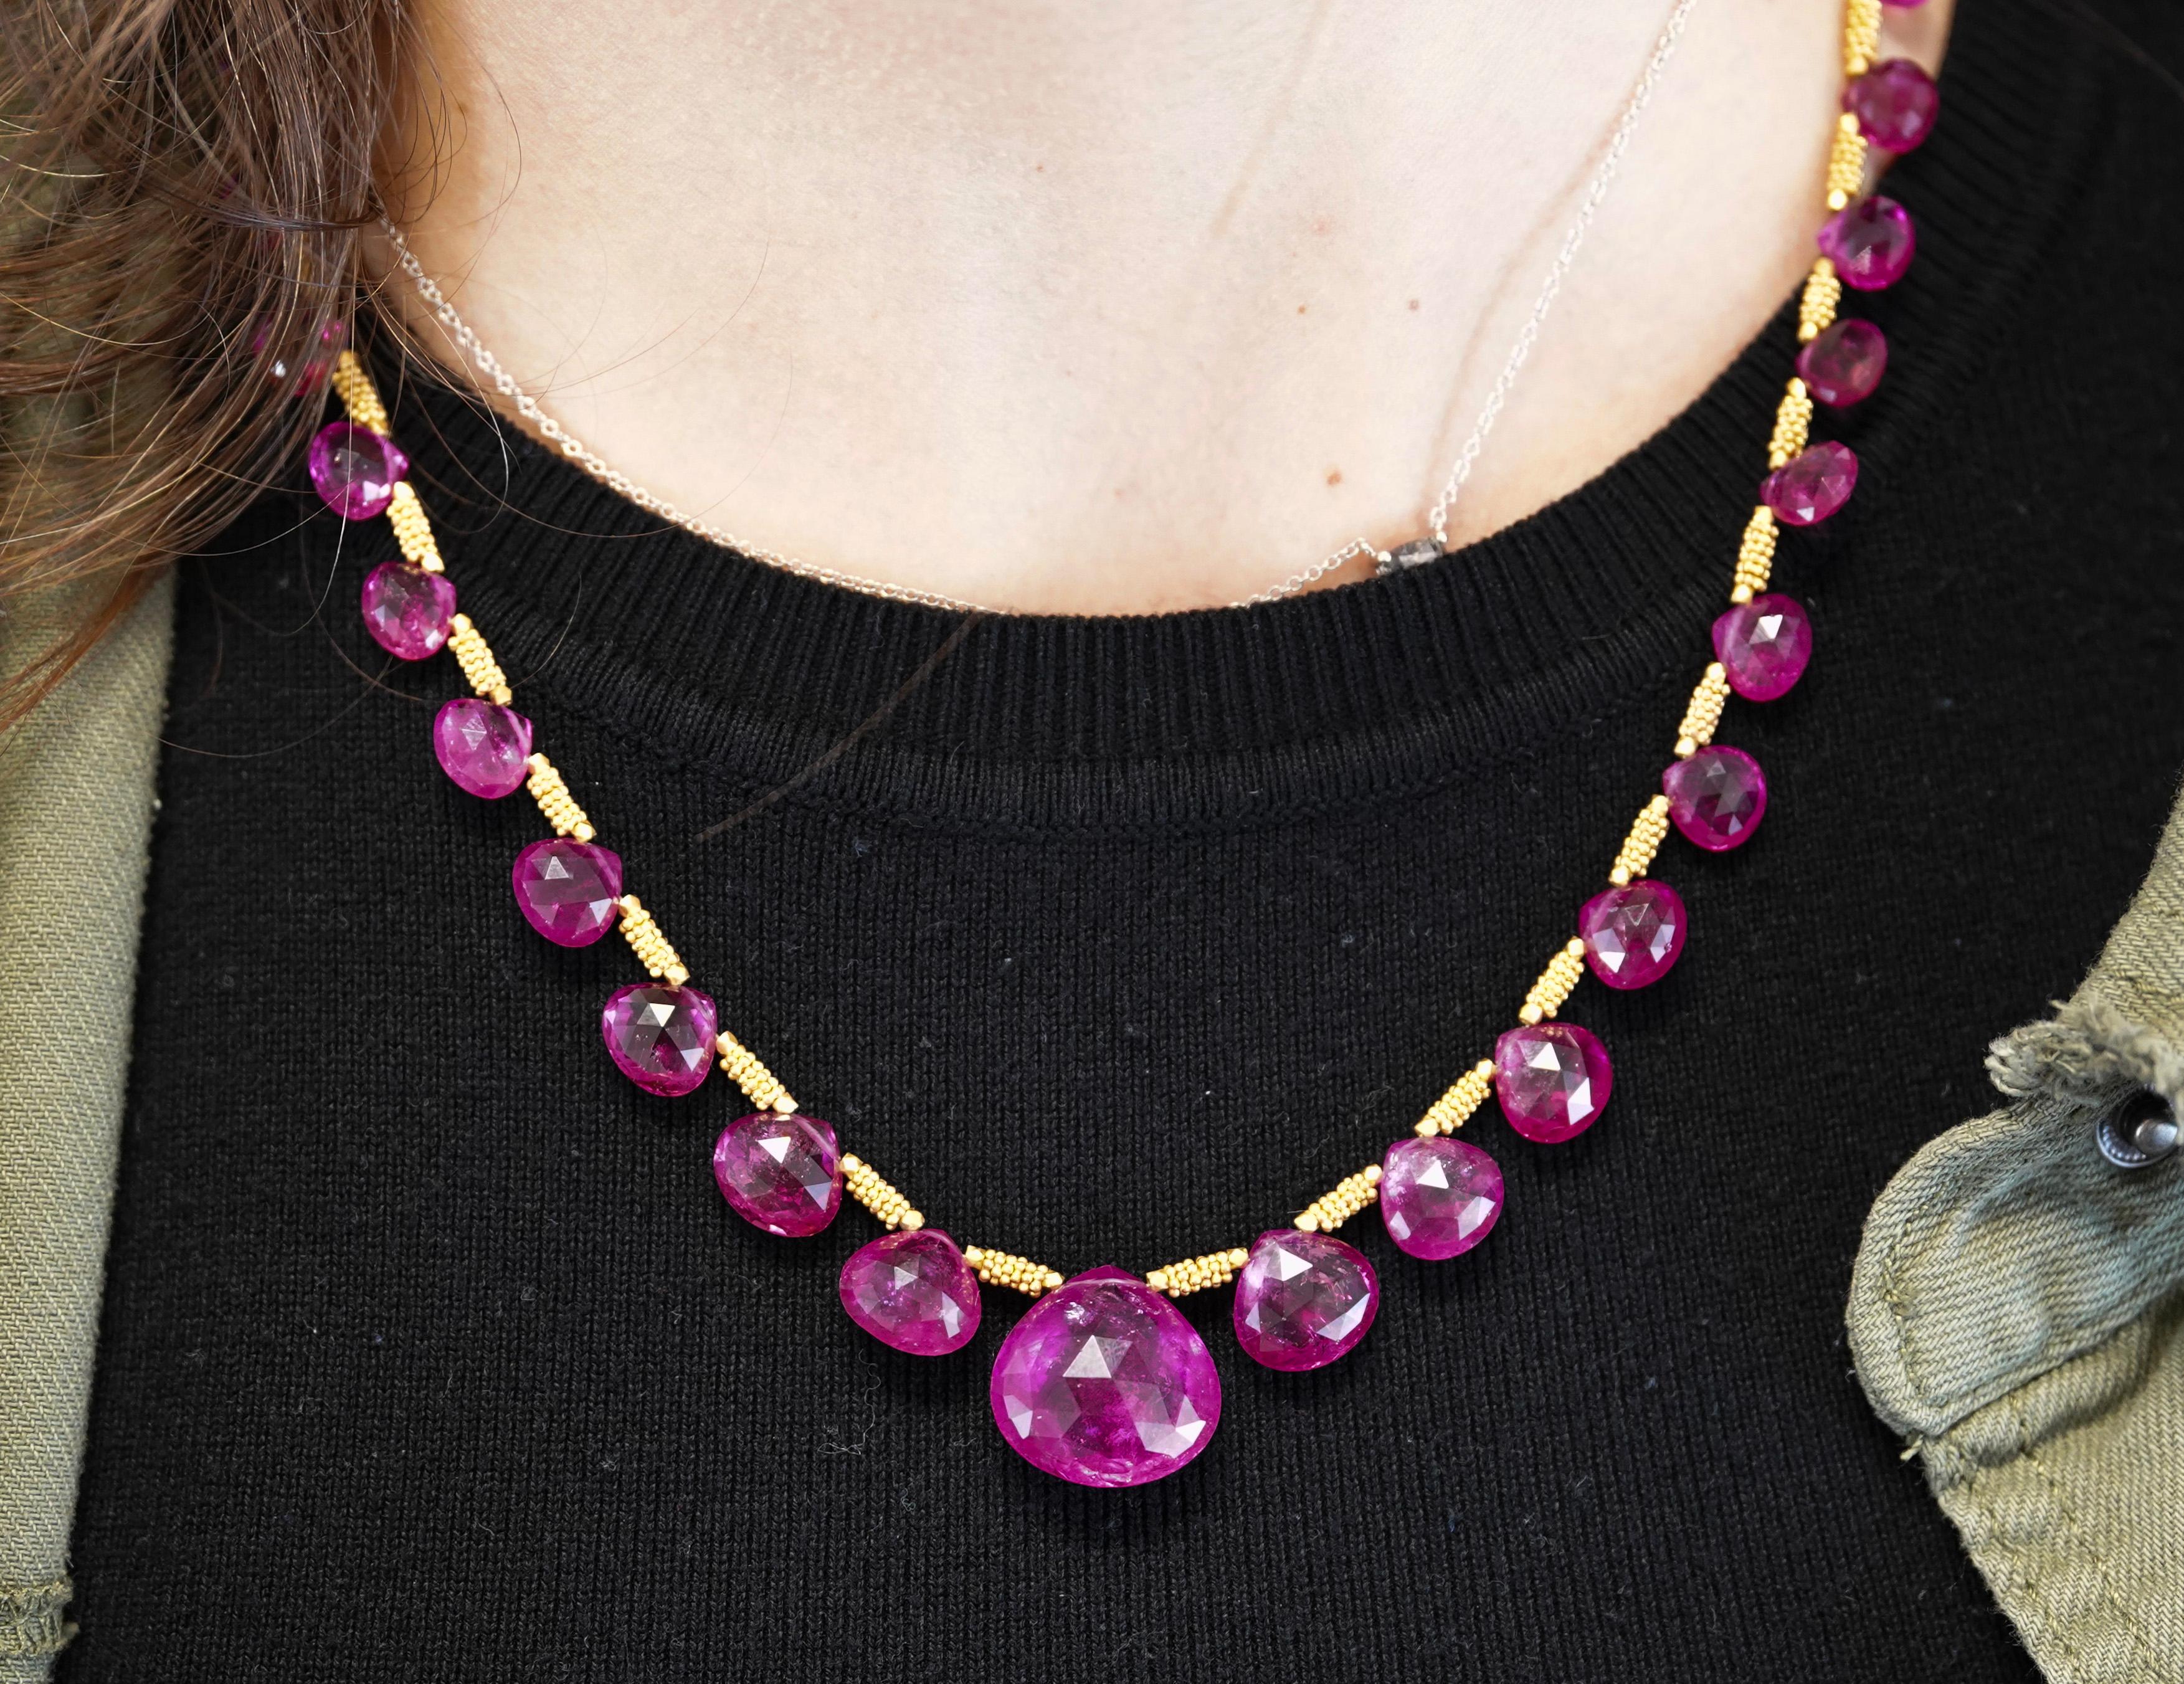 GIA Certified 120 Carat Pear-Shape Pink Rubellite Tourmaline Necklace in 22K In New Condition For Sale In Miami, FL